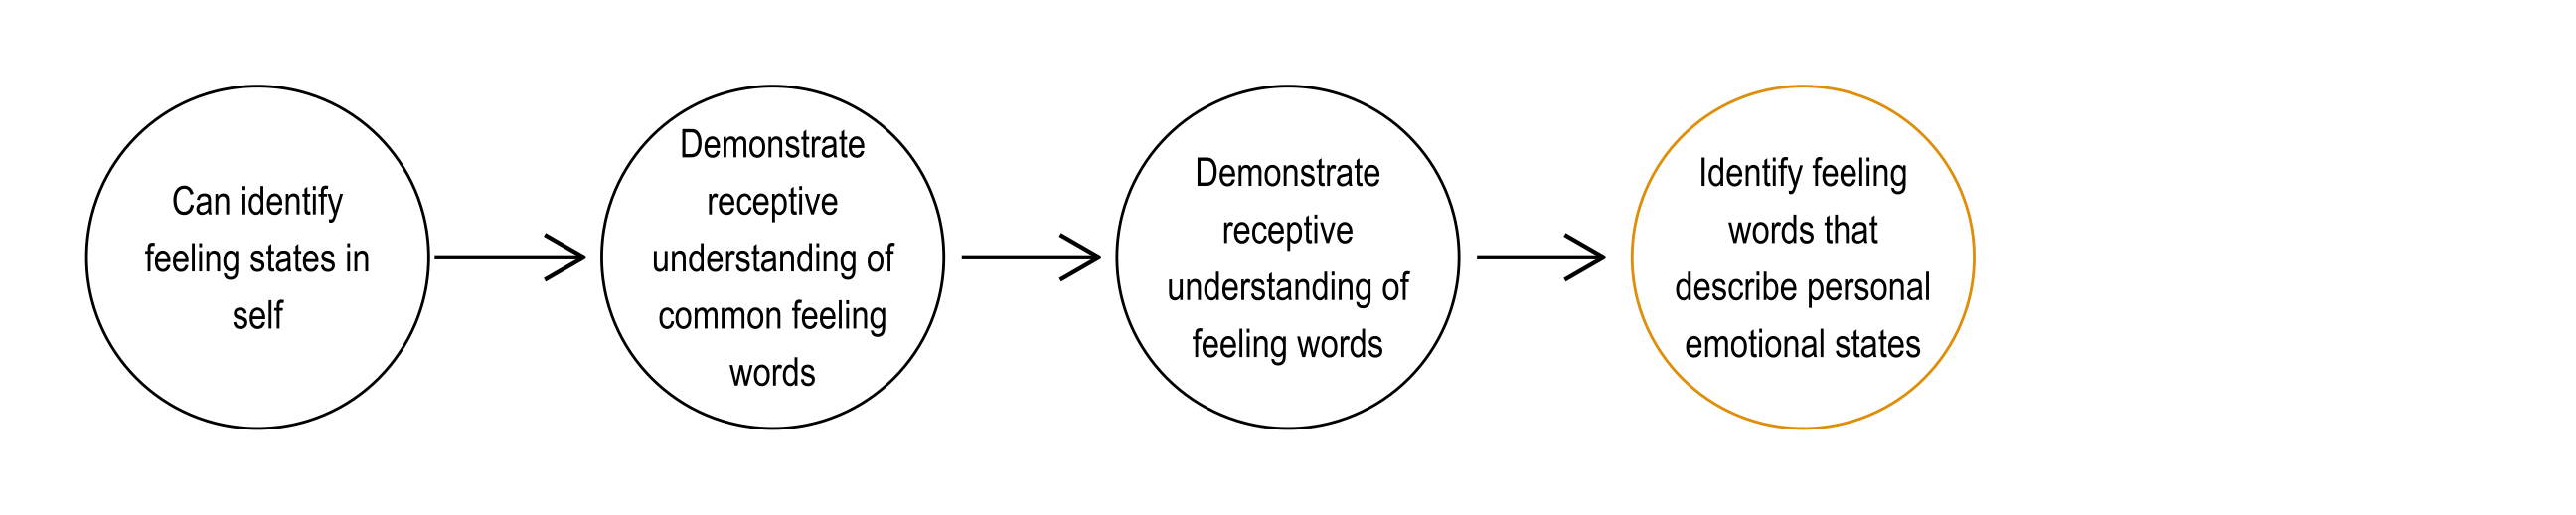 A progression of node complexity: 1) Can identify feeling states in self, 2) Demonstrate receptive understanding of common feeling words, 3) Demonstrate receptive understanding of feeling words, and 4) Identify feeling words that describe personal emotional states.